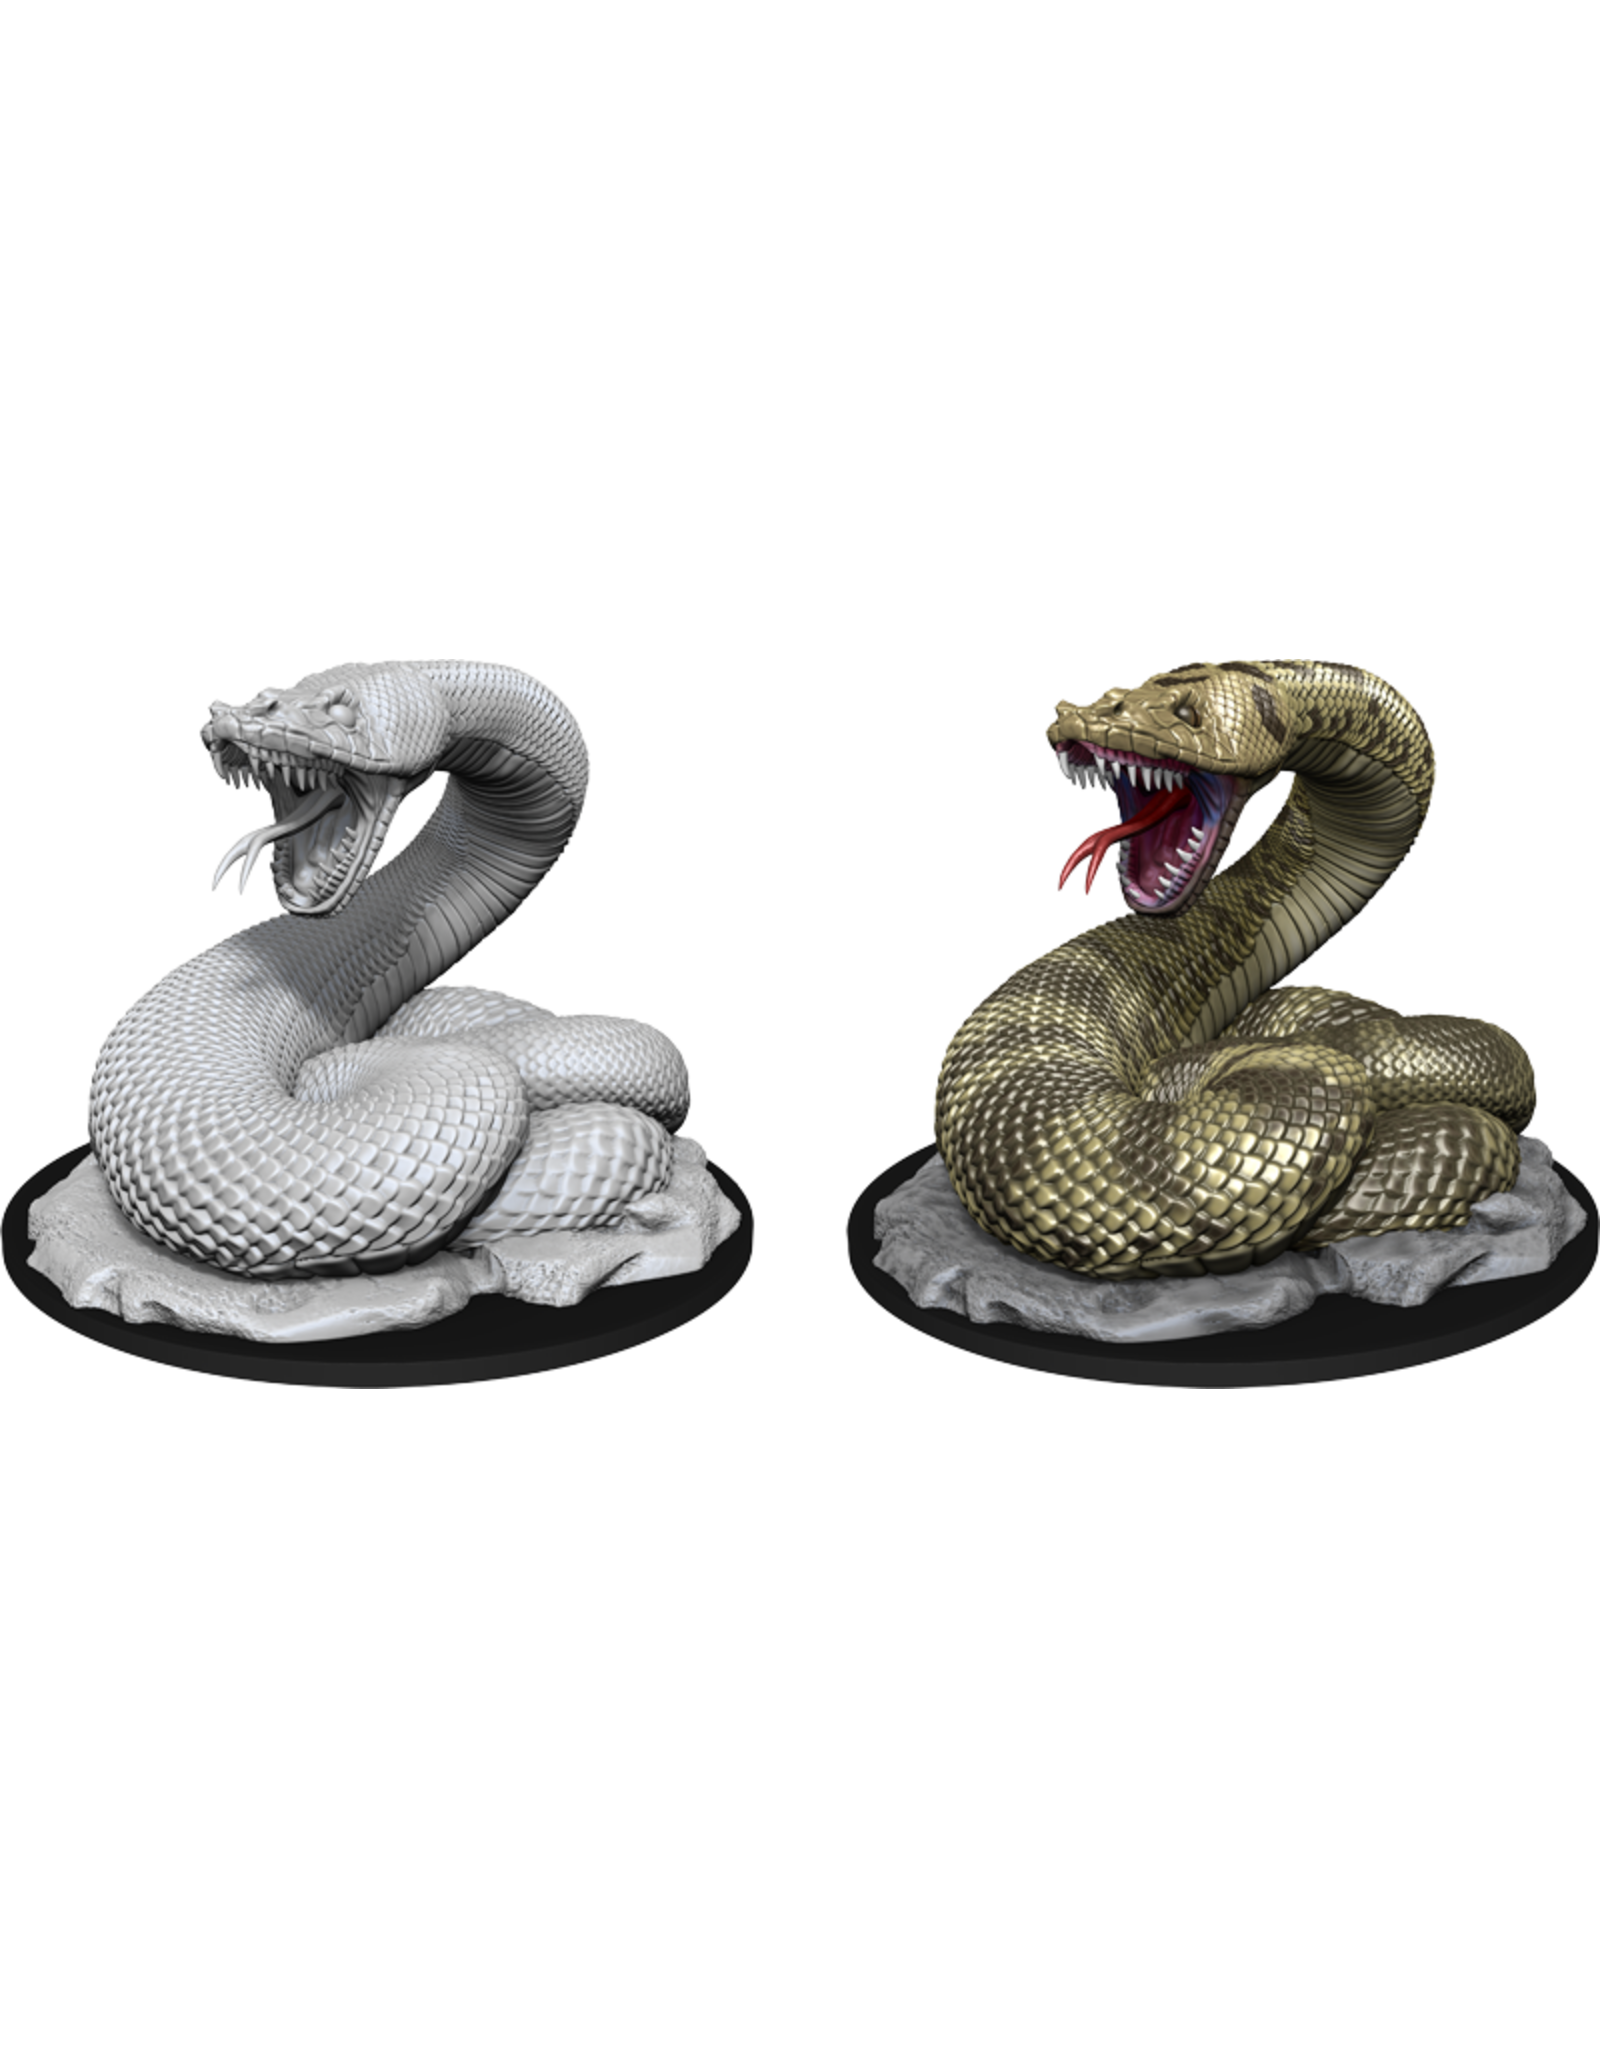 Dungeons & Dragons Nolzur's marvelous miniatures - Giant constrictor snake